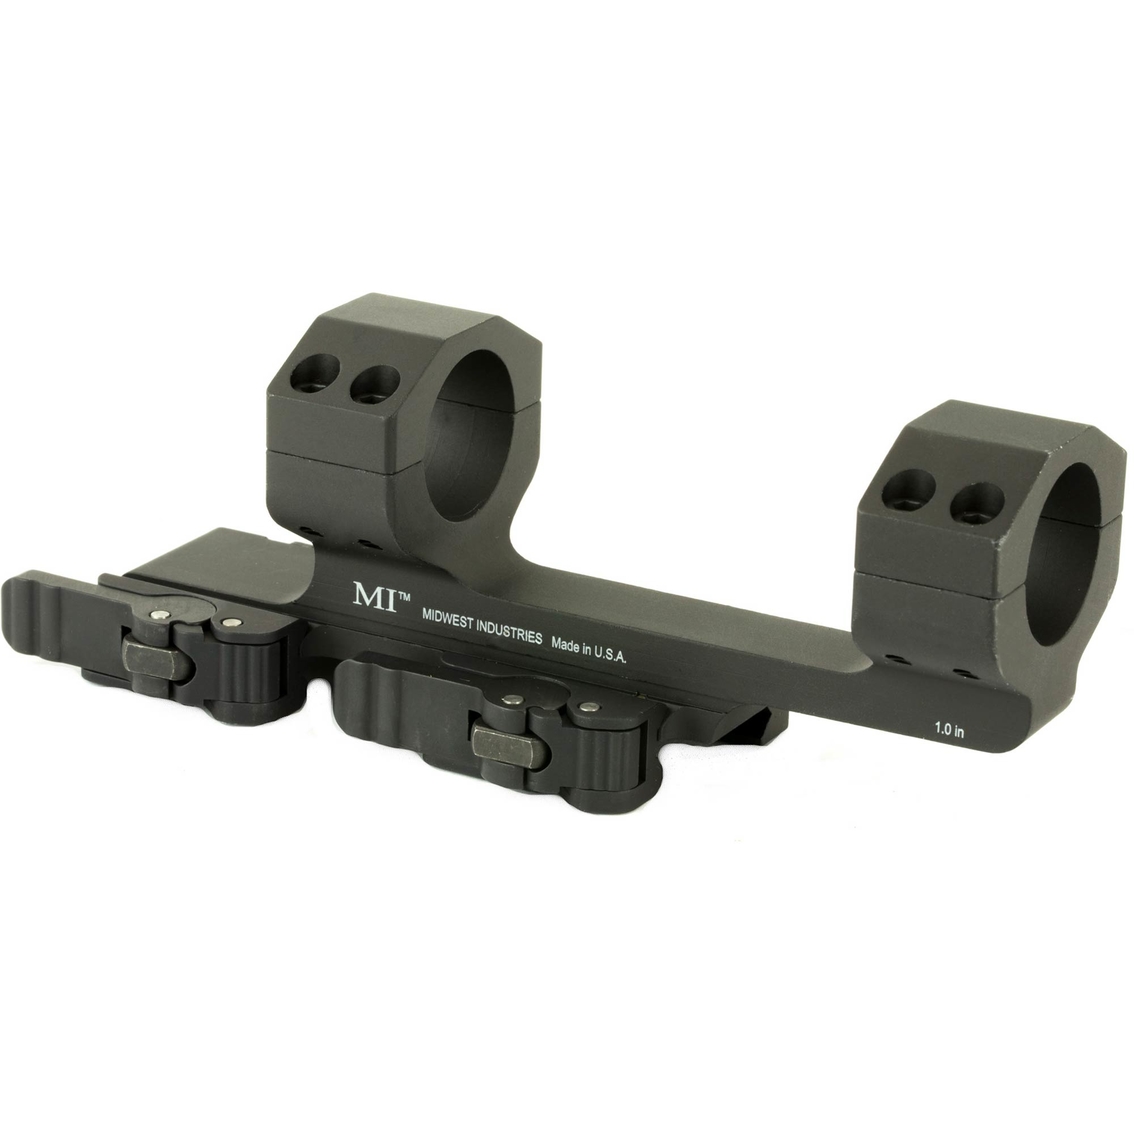 Midwest Industries QD Scope Mount 1 in. with 1.5 in. Offset, Black - Image 2 of 2